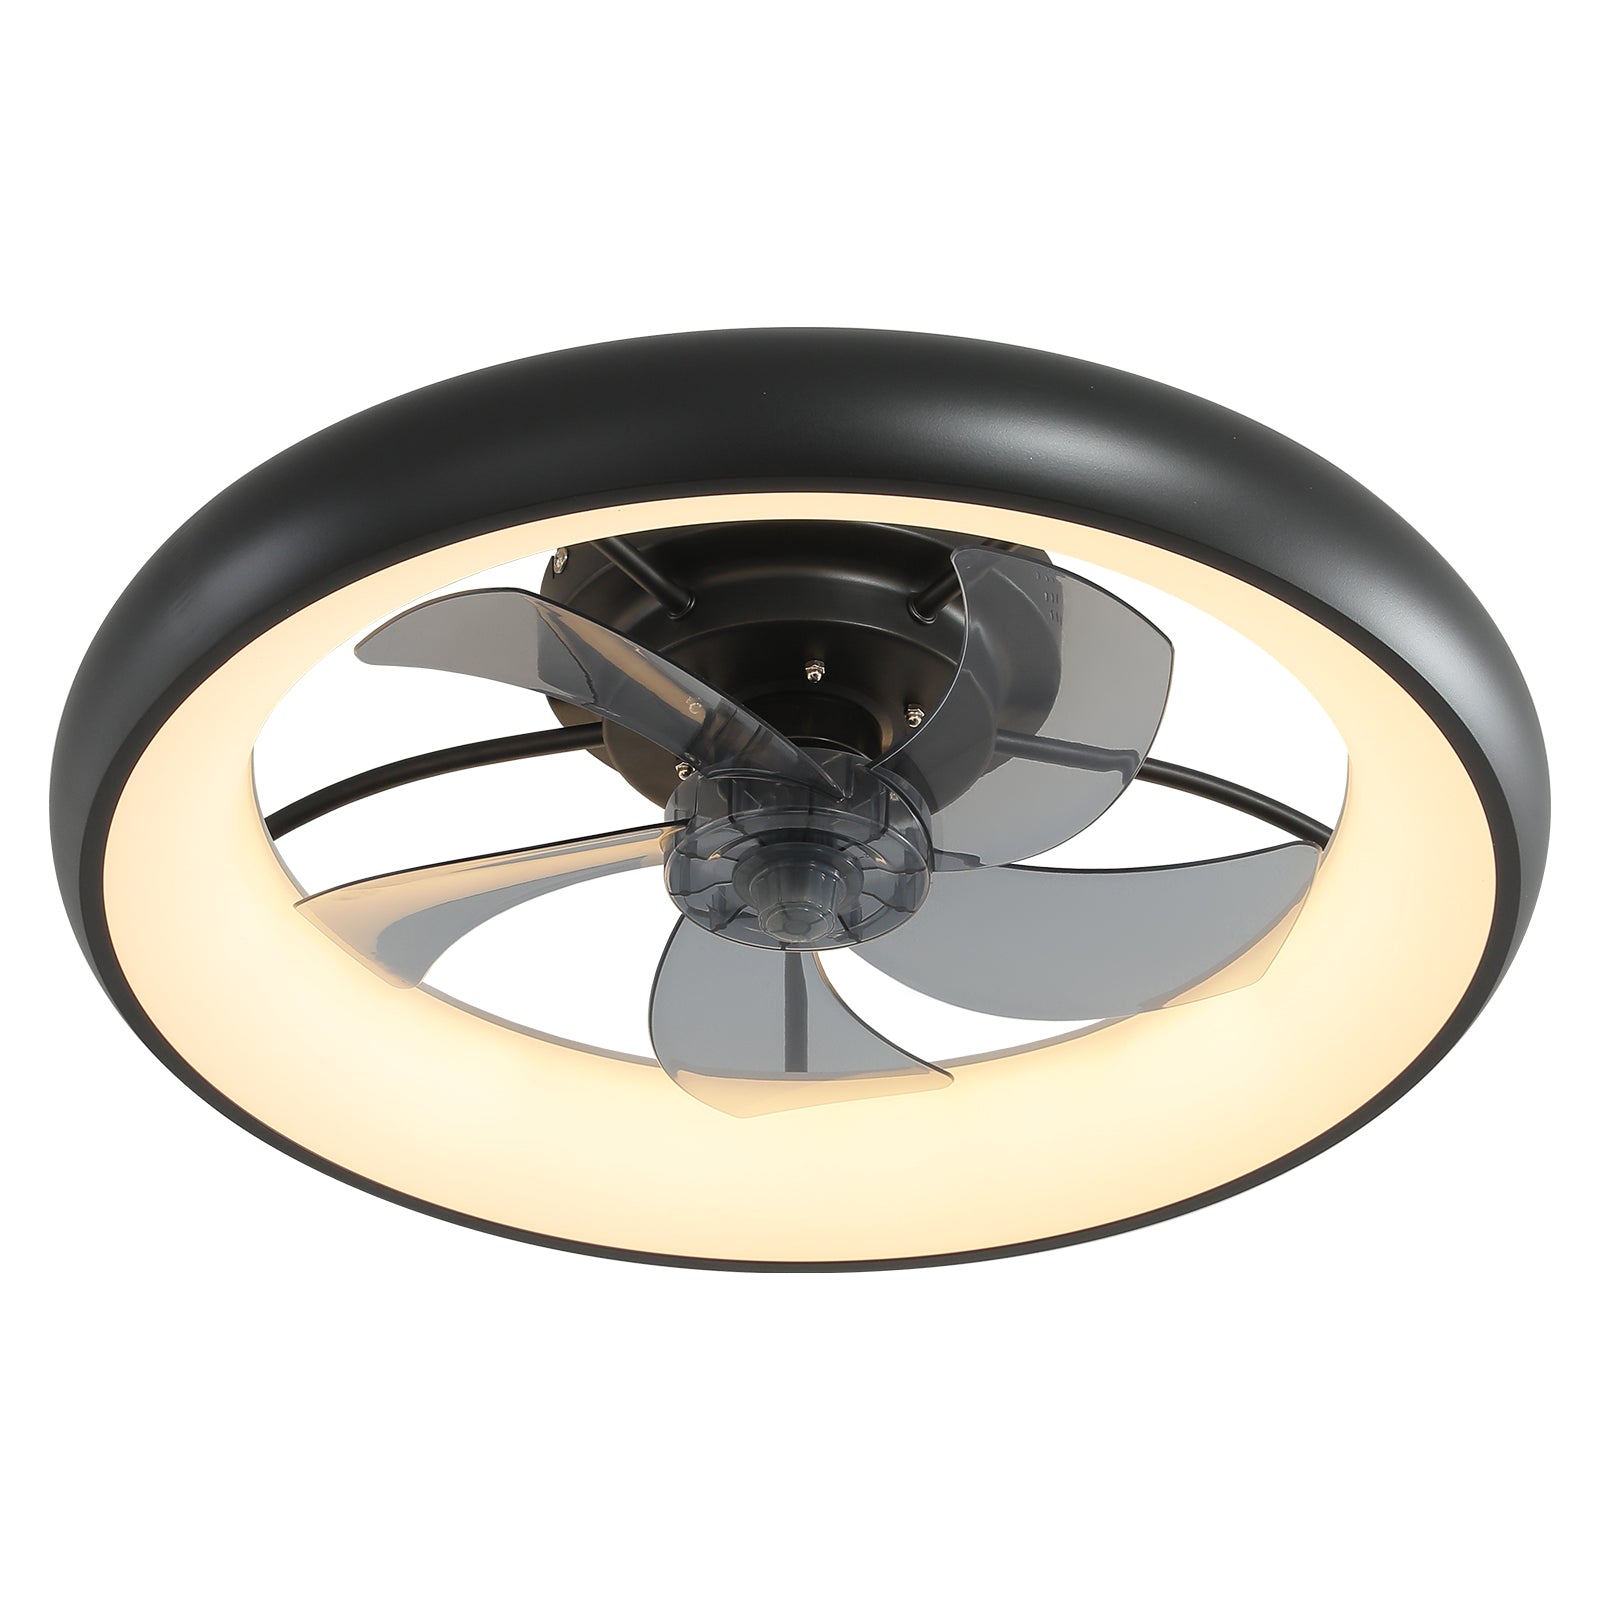 Invisible Blades Semi Flush Mount Fan with Lights, Dimmable LED Reversible Blades Timing with Remote Control (Black)